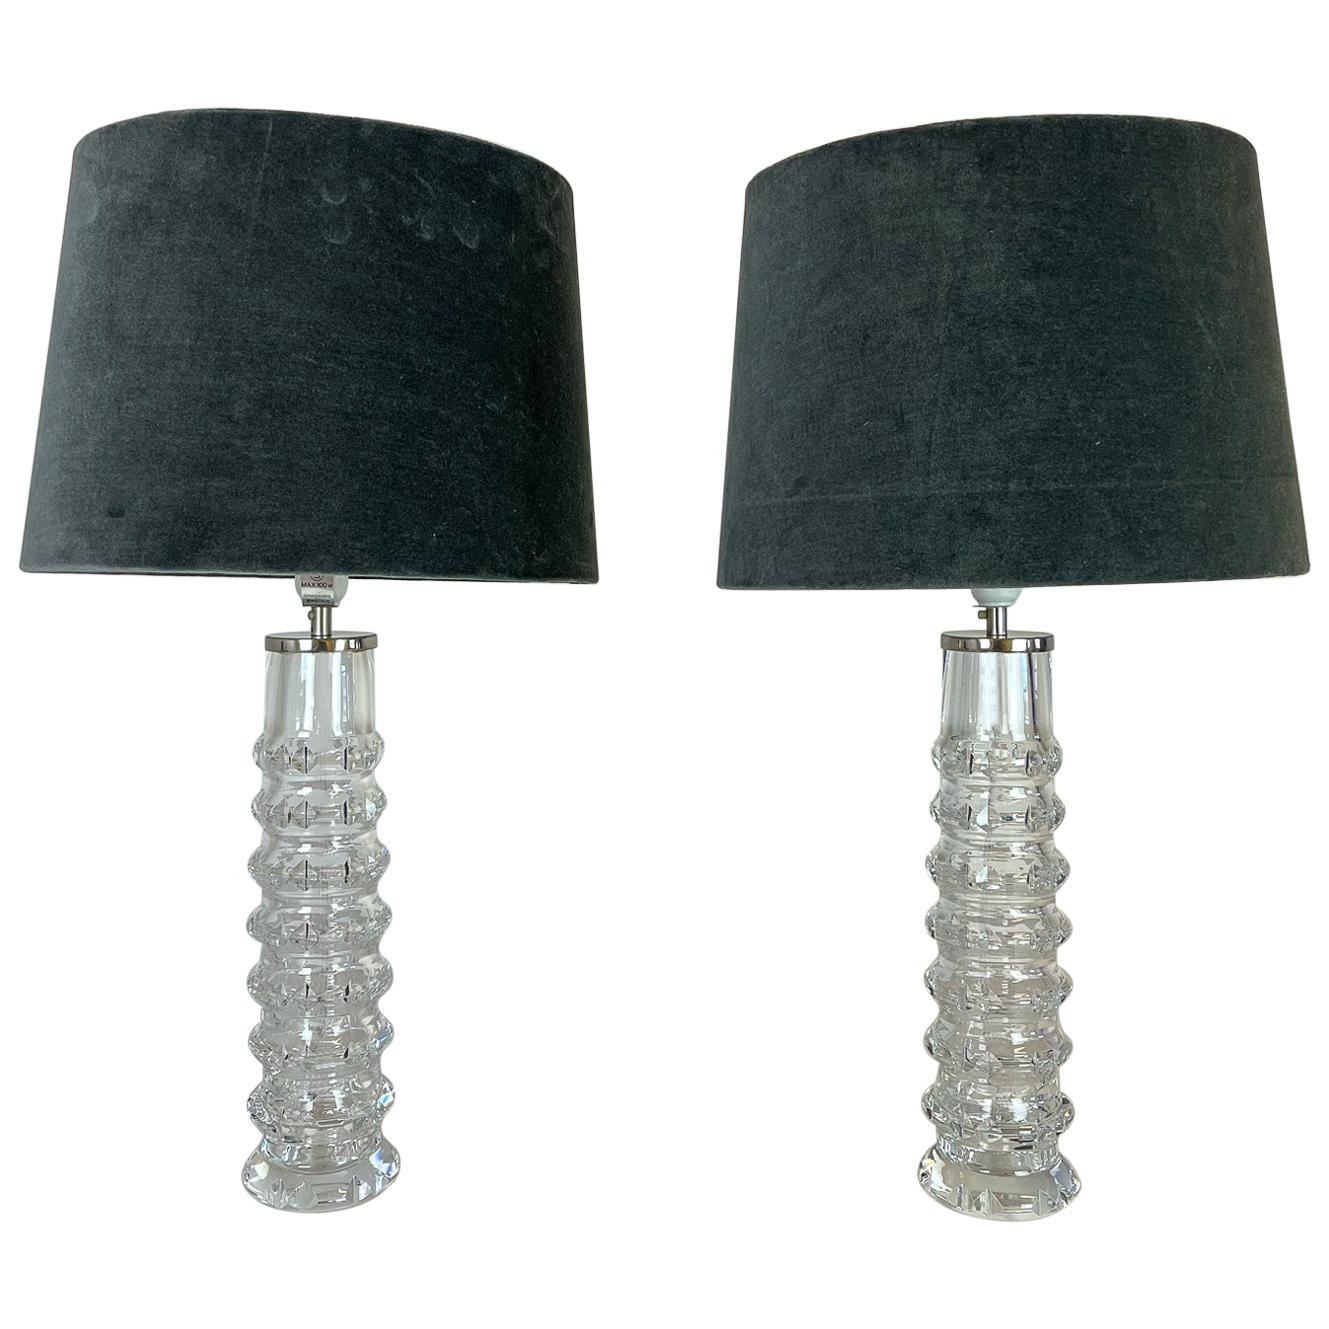 Midcentury Pair of Crystal Lamps by Carl Fagerlund for Orrefors Sweden, 1970s For Sale